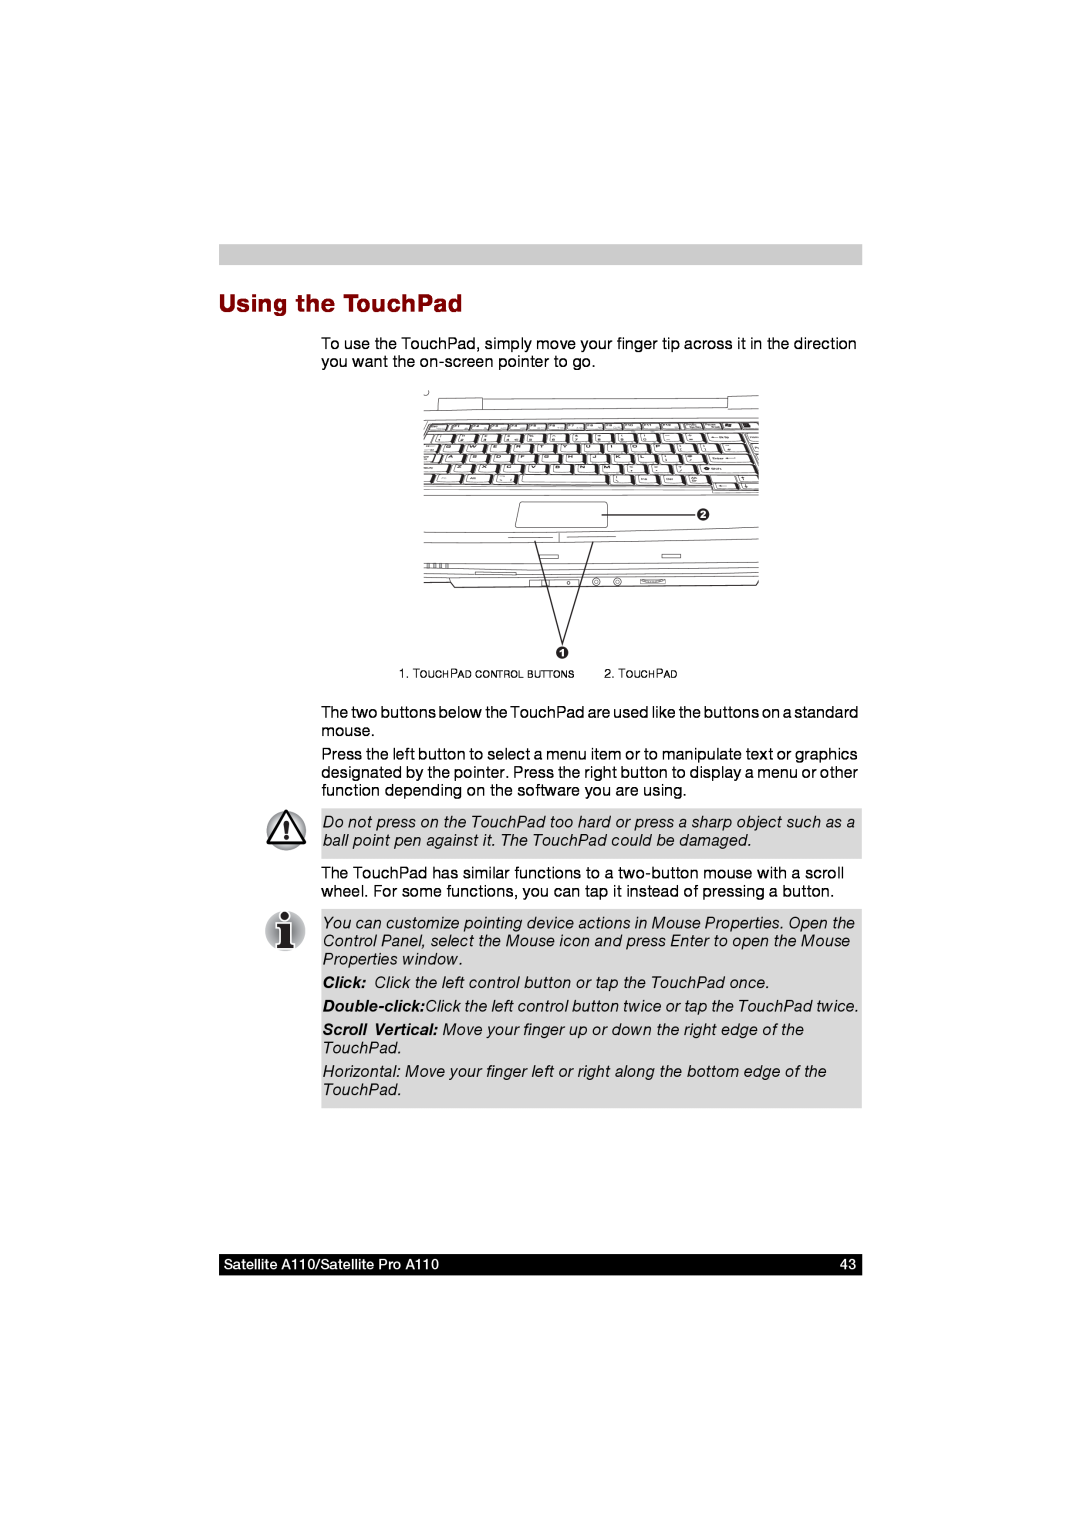 Toshiba A110 user manual Using the TouchPad 